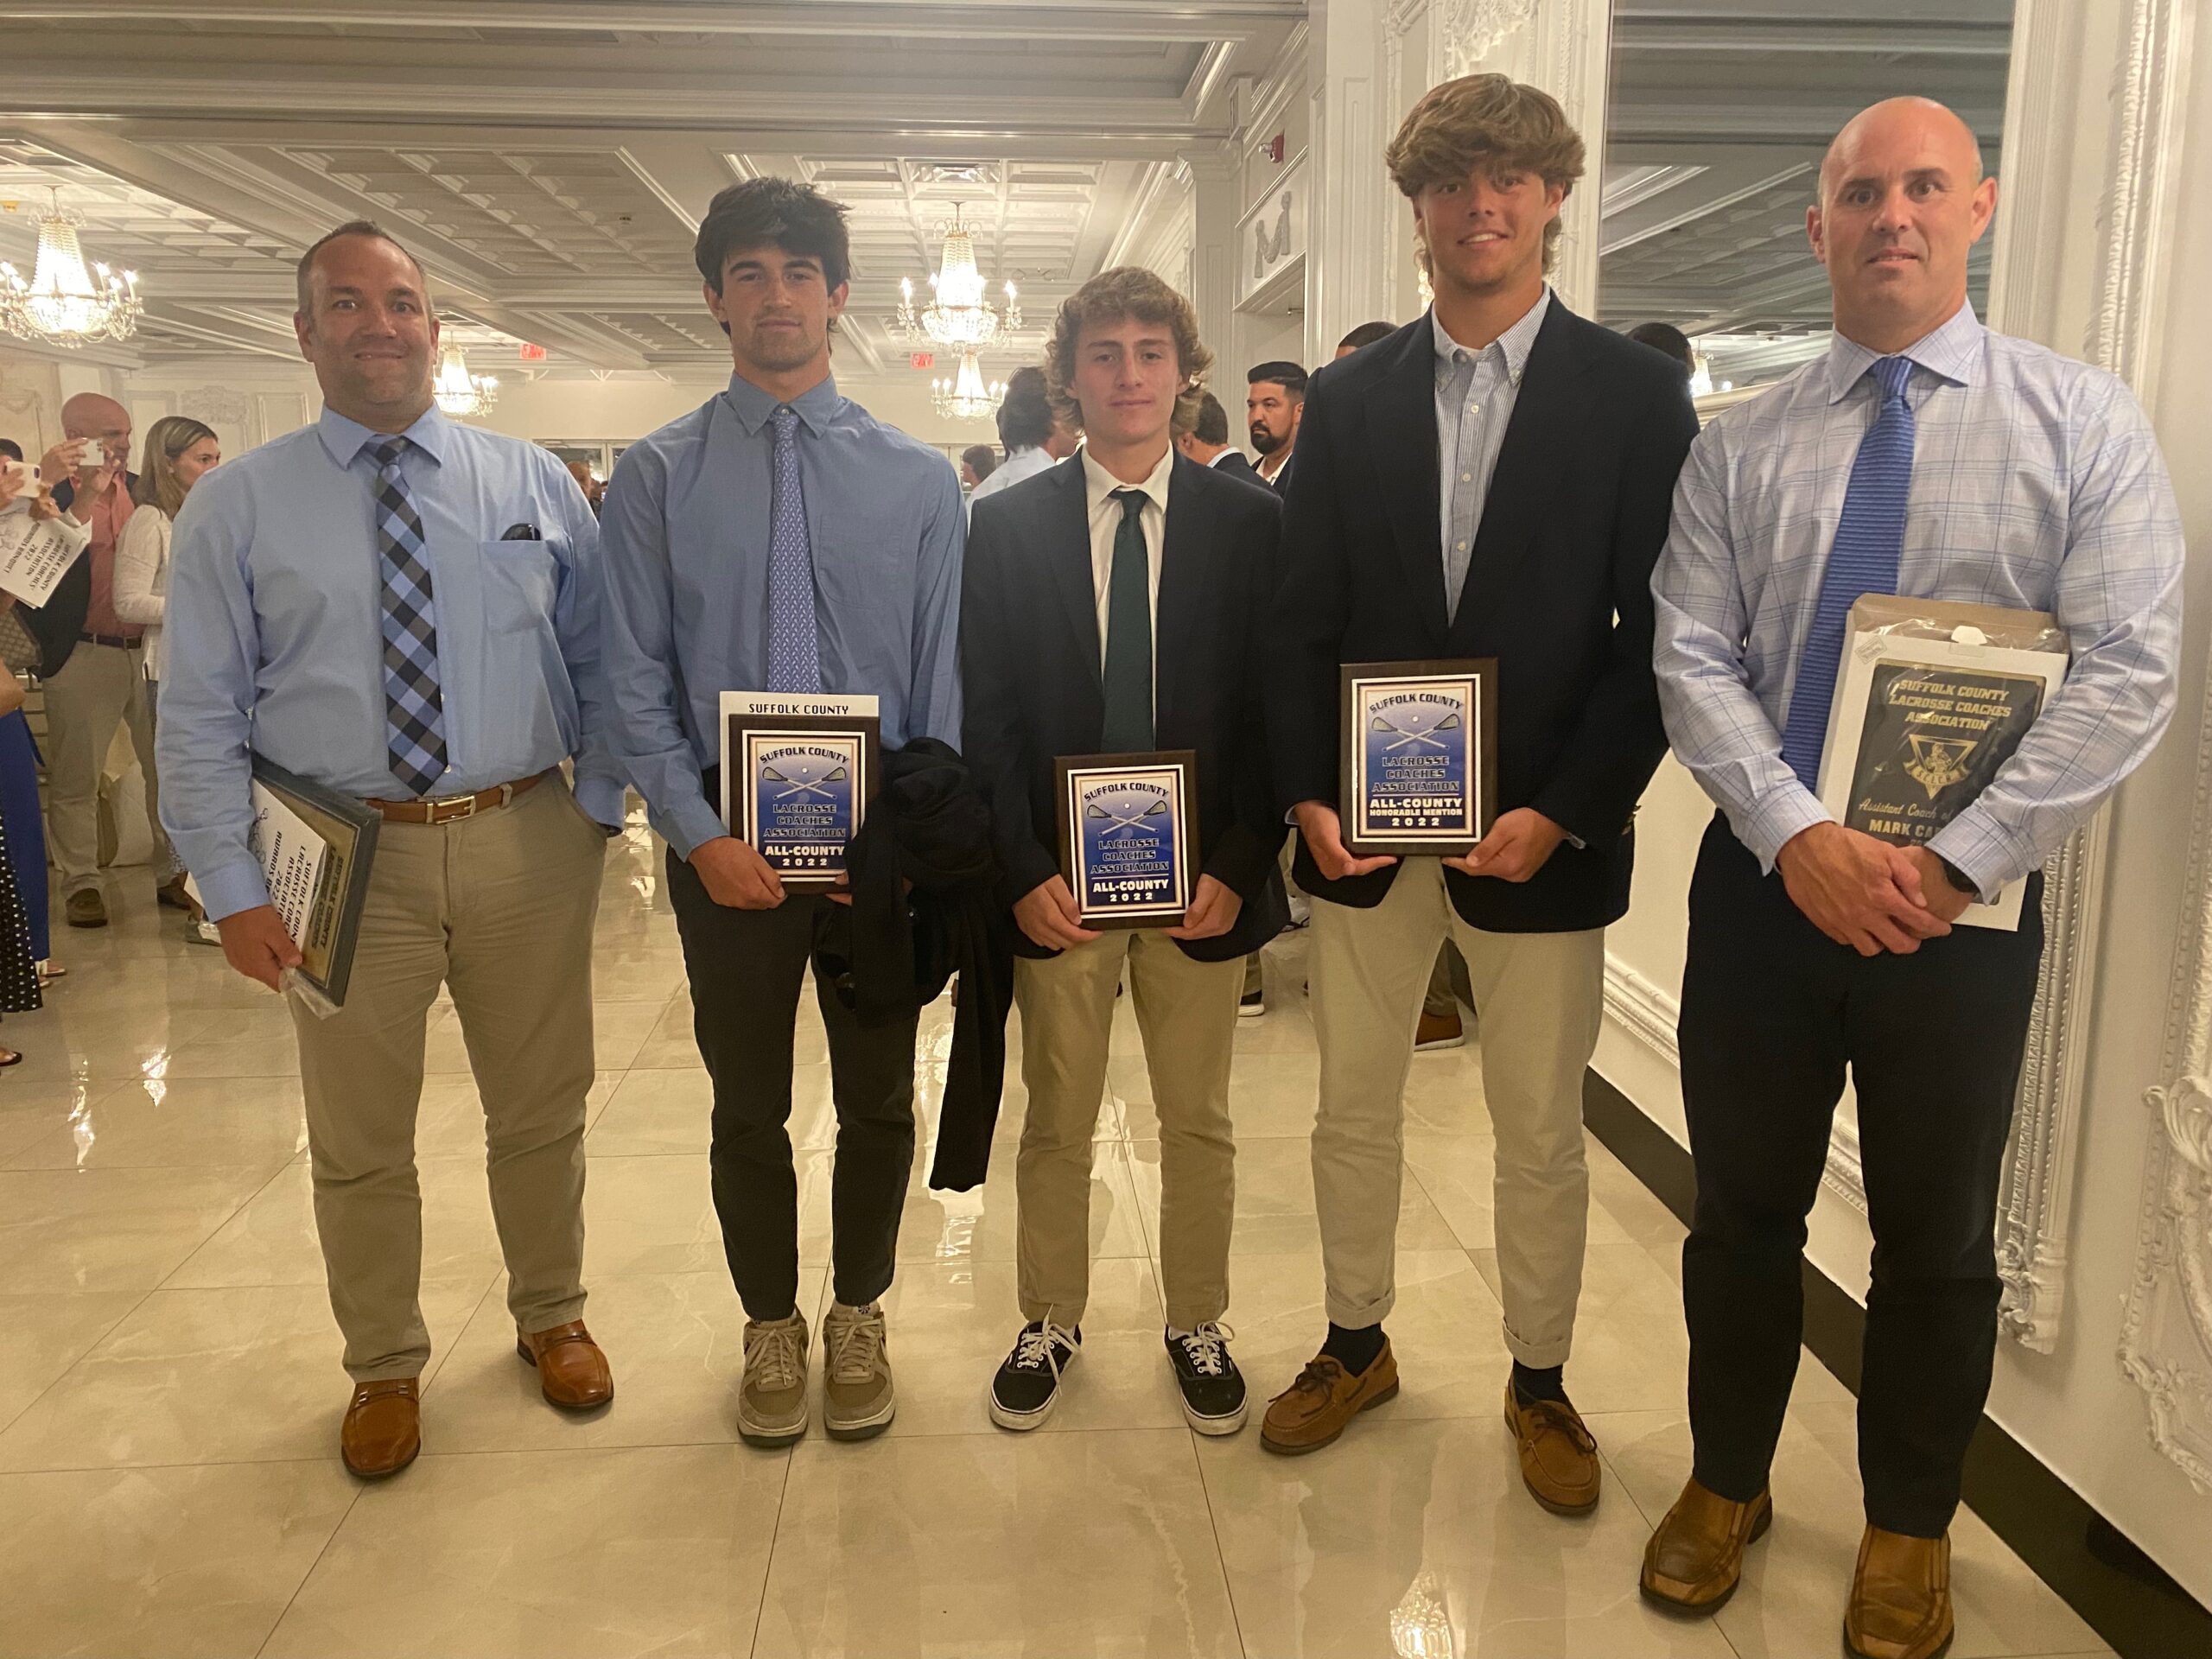 South Fork boys lacrosse team members and East Hampton sophomores Jack Cooper, Luke Castillo and Charles Corwin with head coach Matt Babb and assistant coach Mark Carlson. SOUTHAMPTON SCHOOL DISTRICT